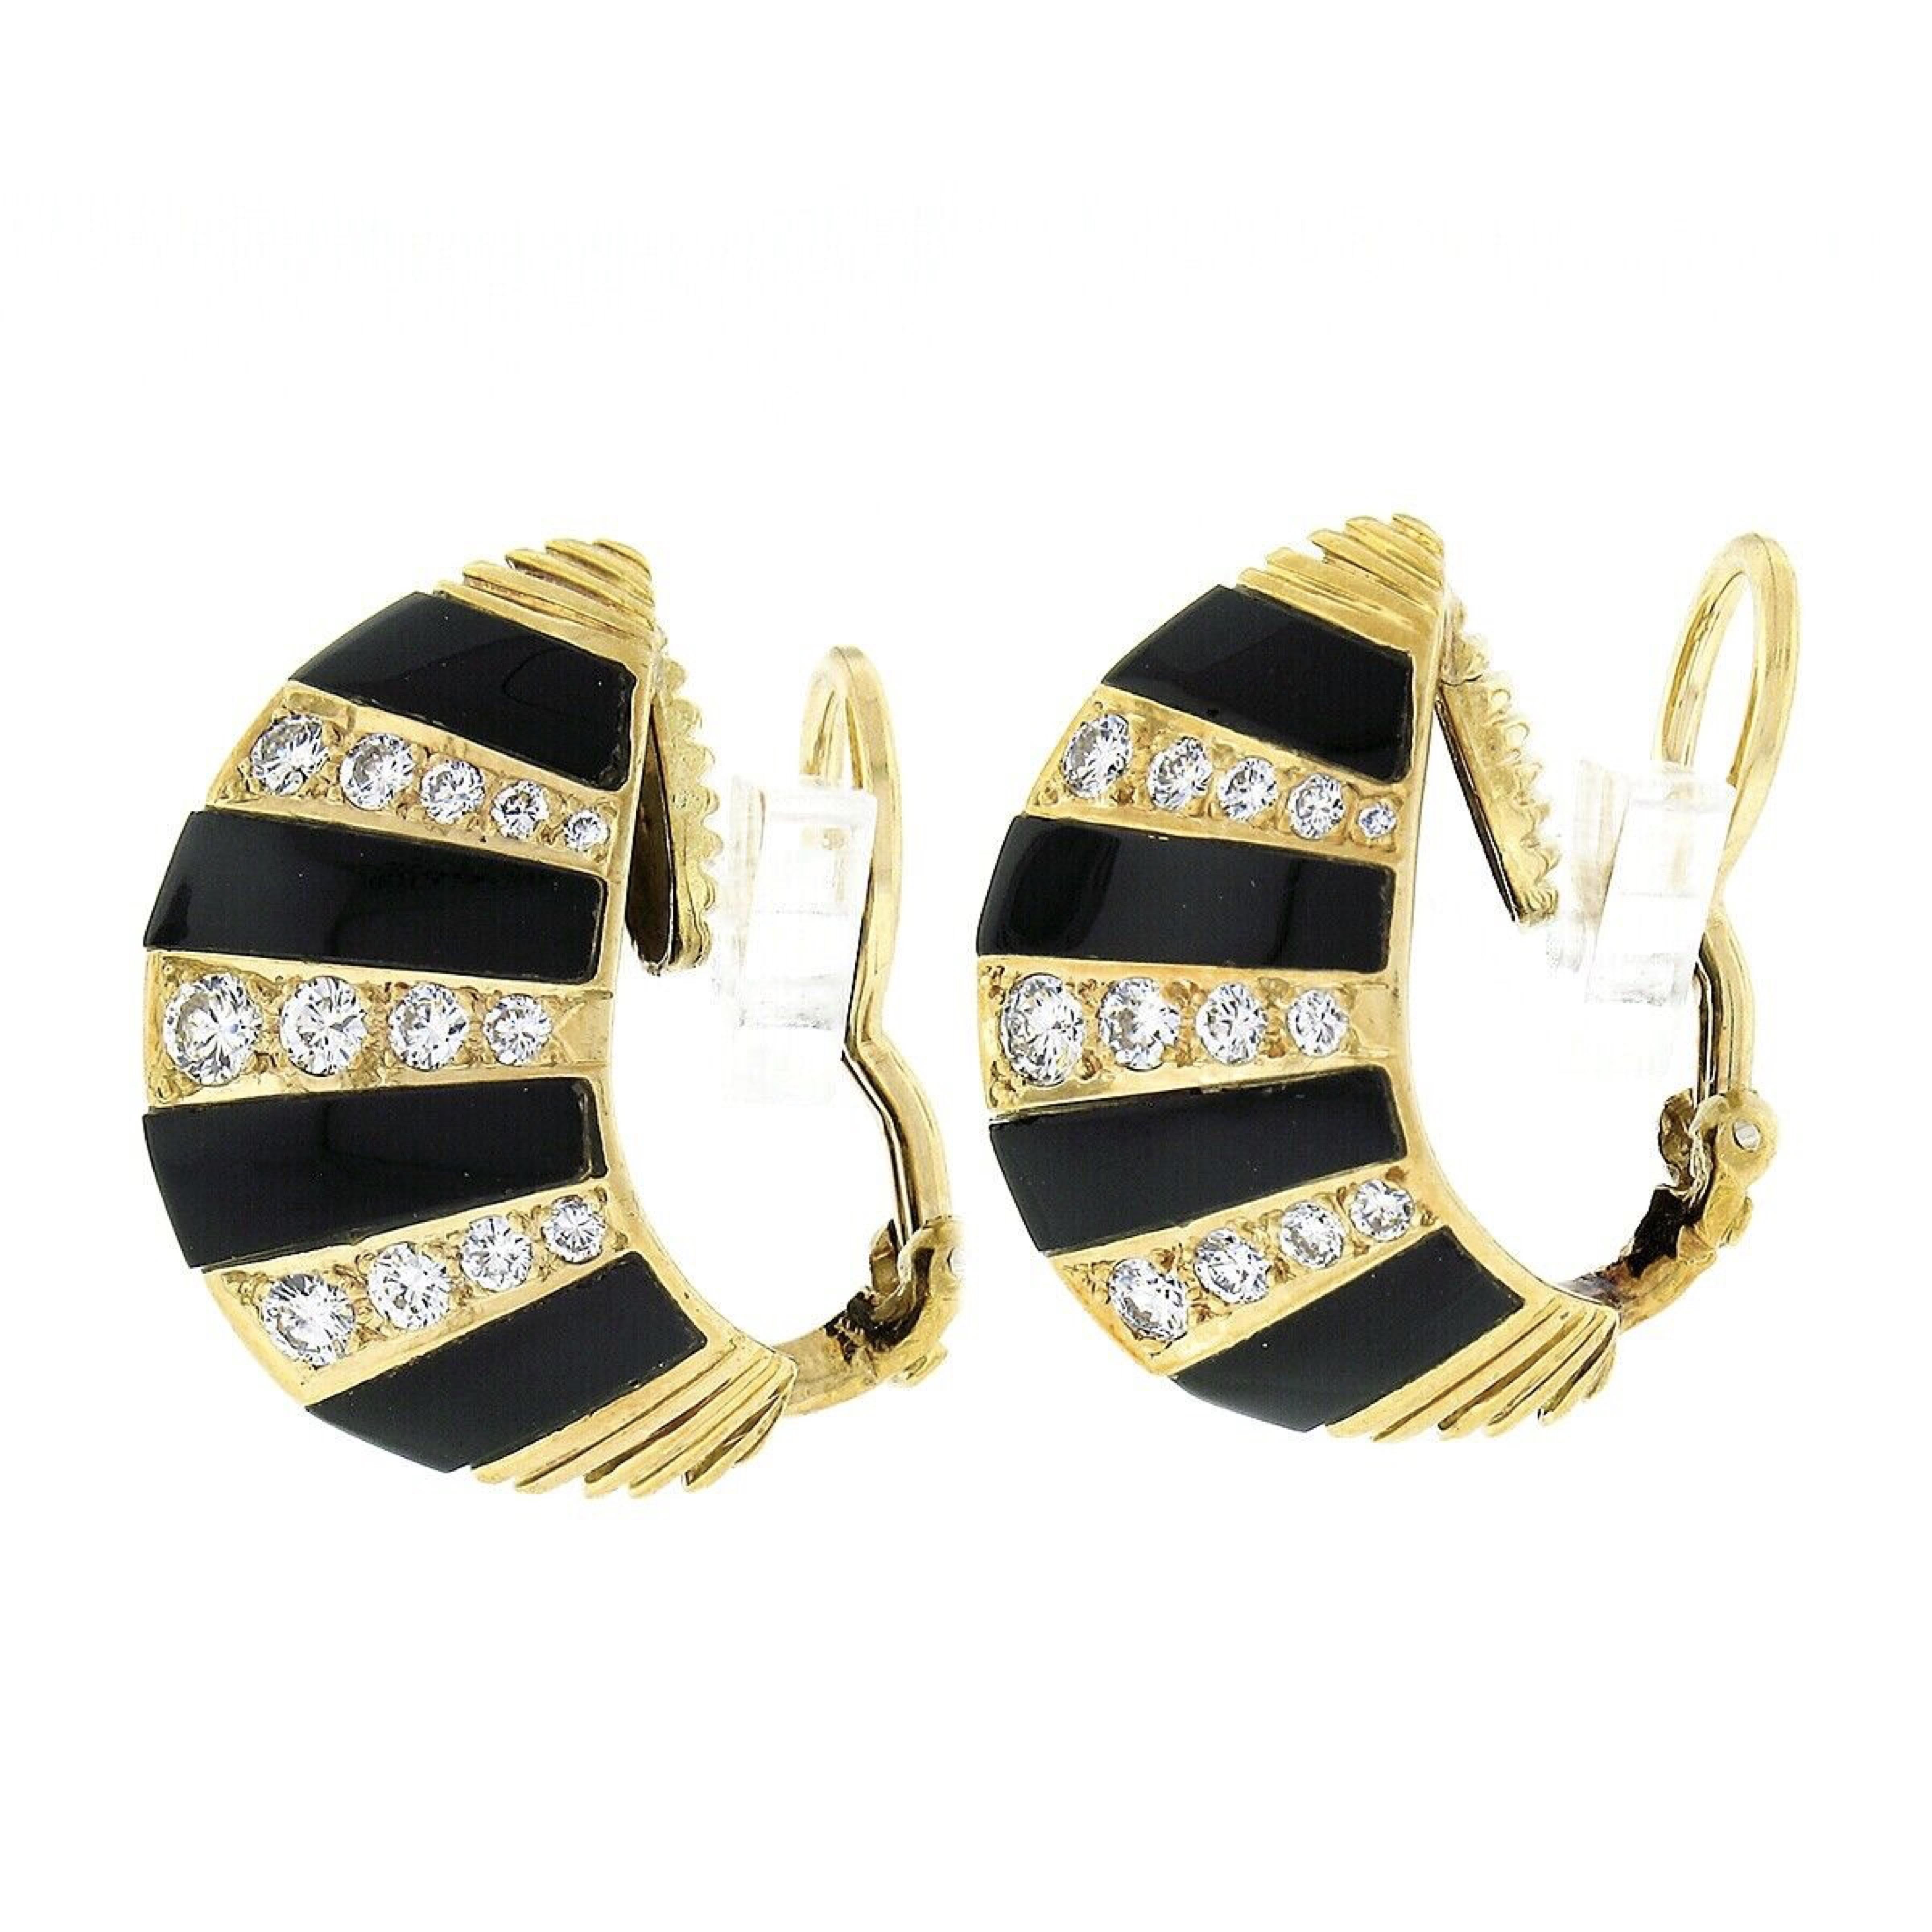 Round Cut Vintage 18k Gold Inlaid Black Onyx & Pave Diamond Striped Domed Button Earrings For Sale